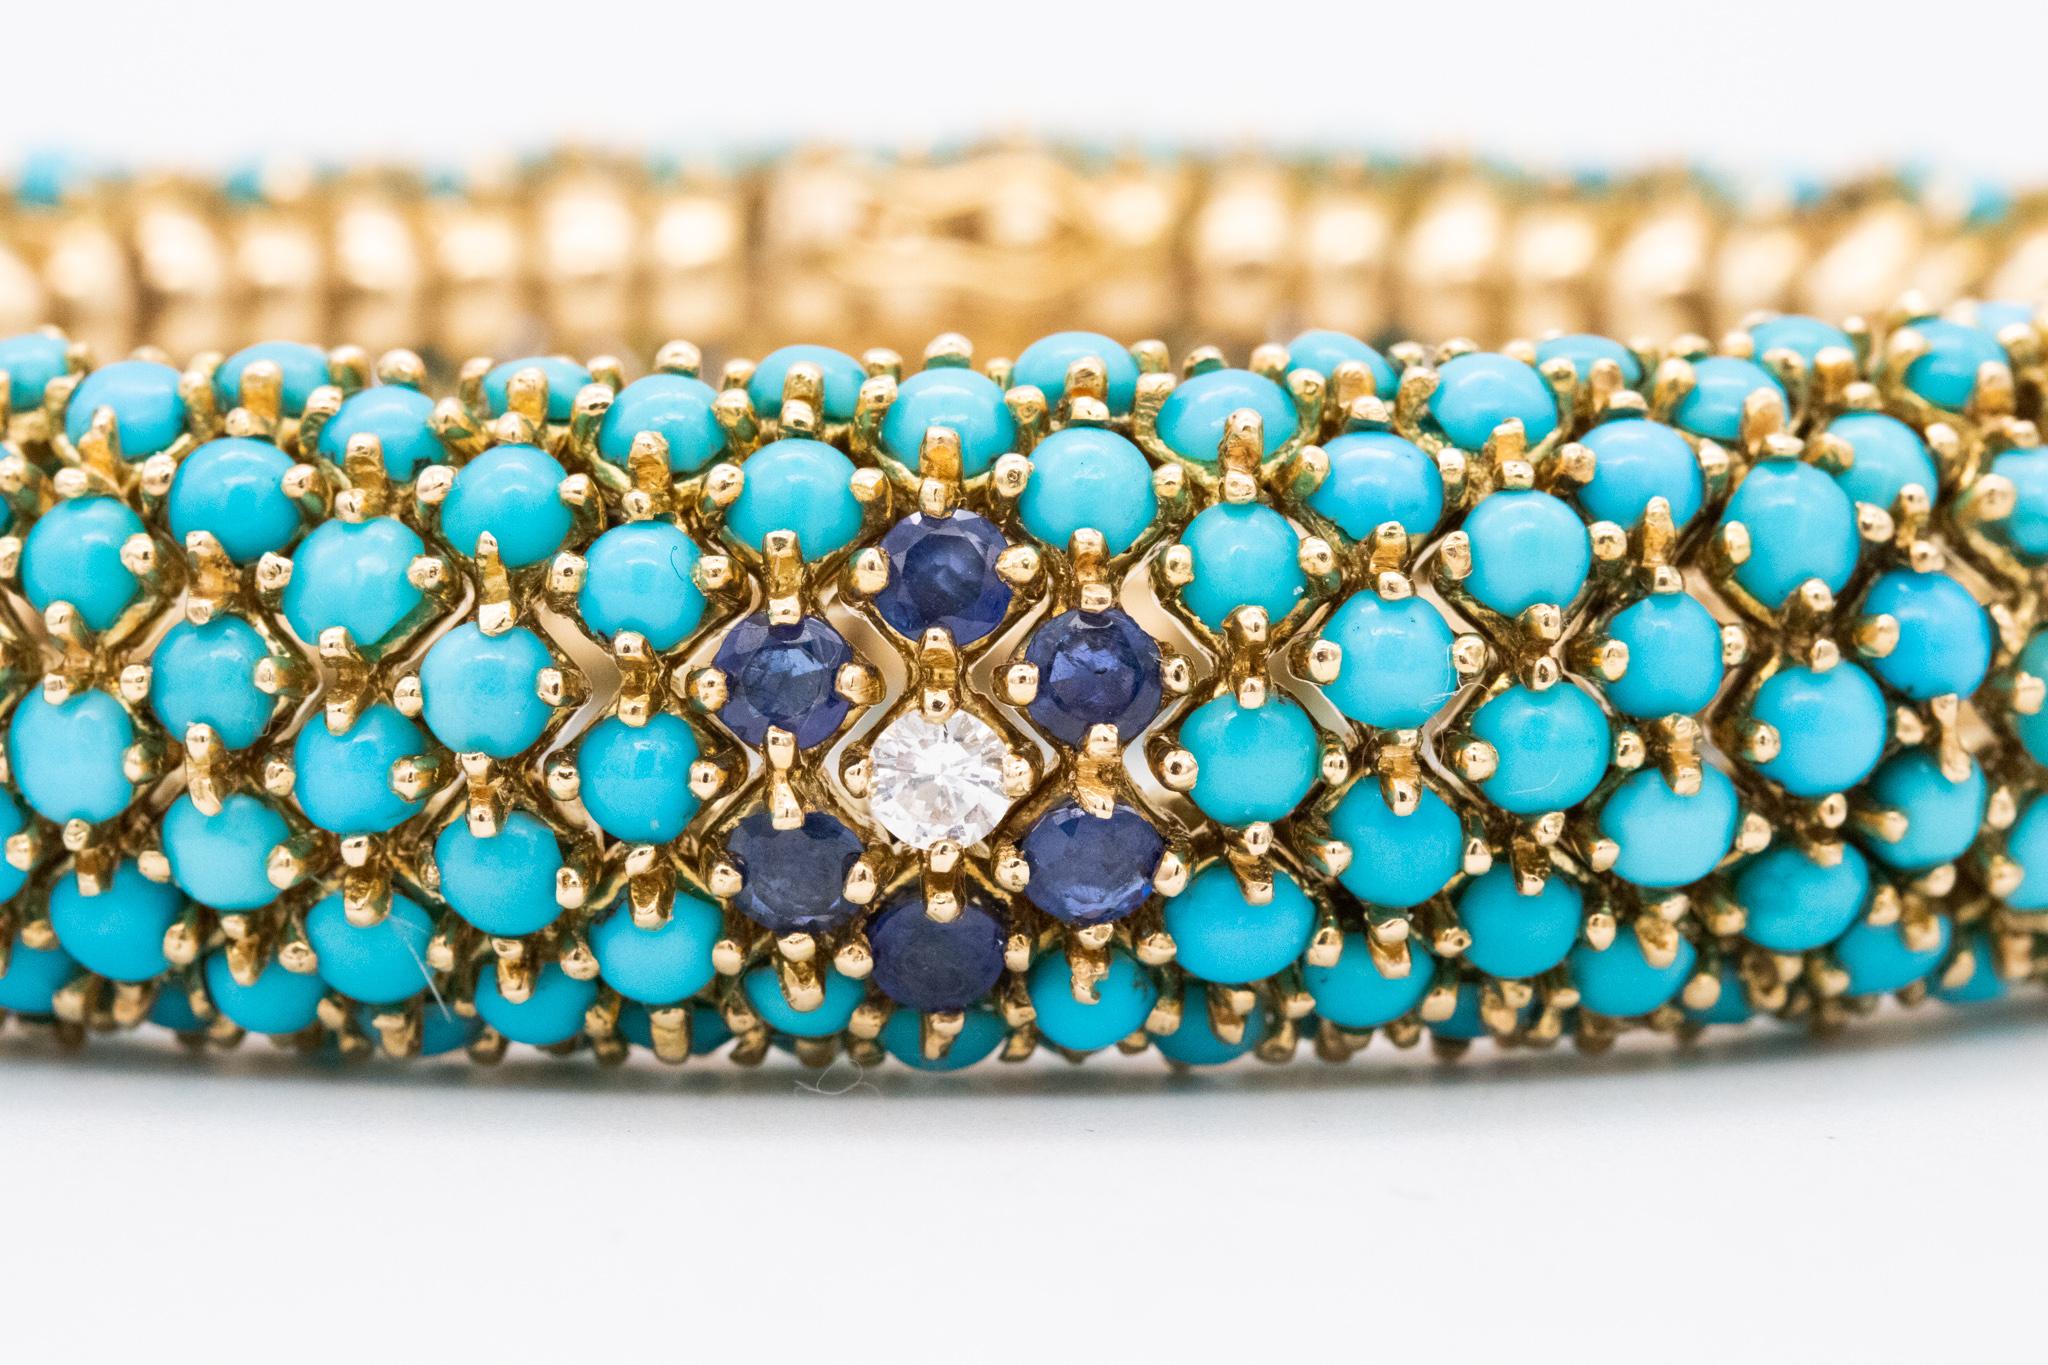 Hammerman Brothers 1960 Bracelet in 18Kt Gold with 35.7 Ctw Turquoises Diamonds 1